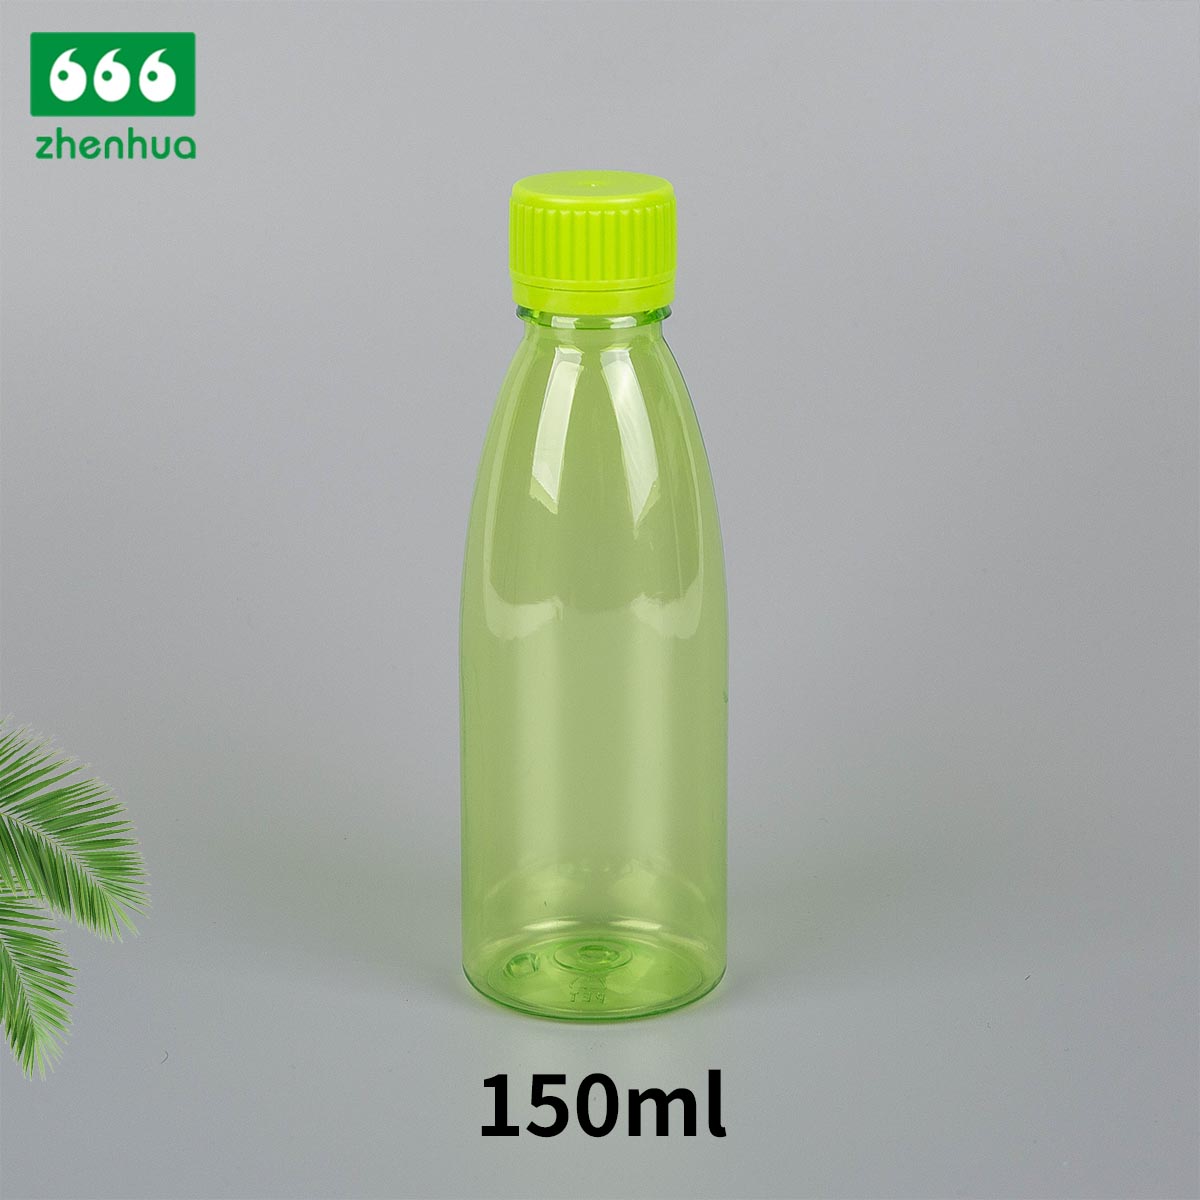 150ml/200ml/350ml Round White/Clear PET Medicinal Mouthwash Bottle Juice Drink Bottle with Tamper Proof Cap